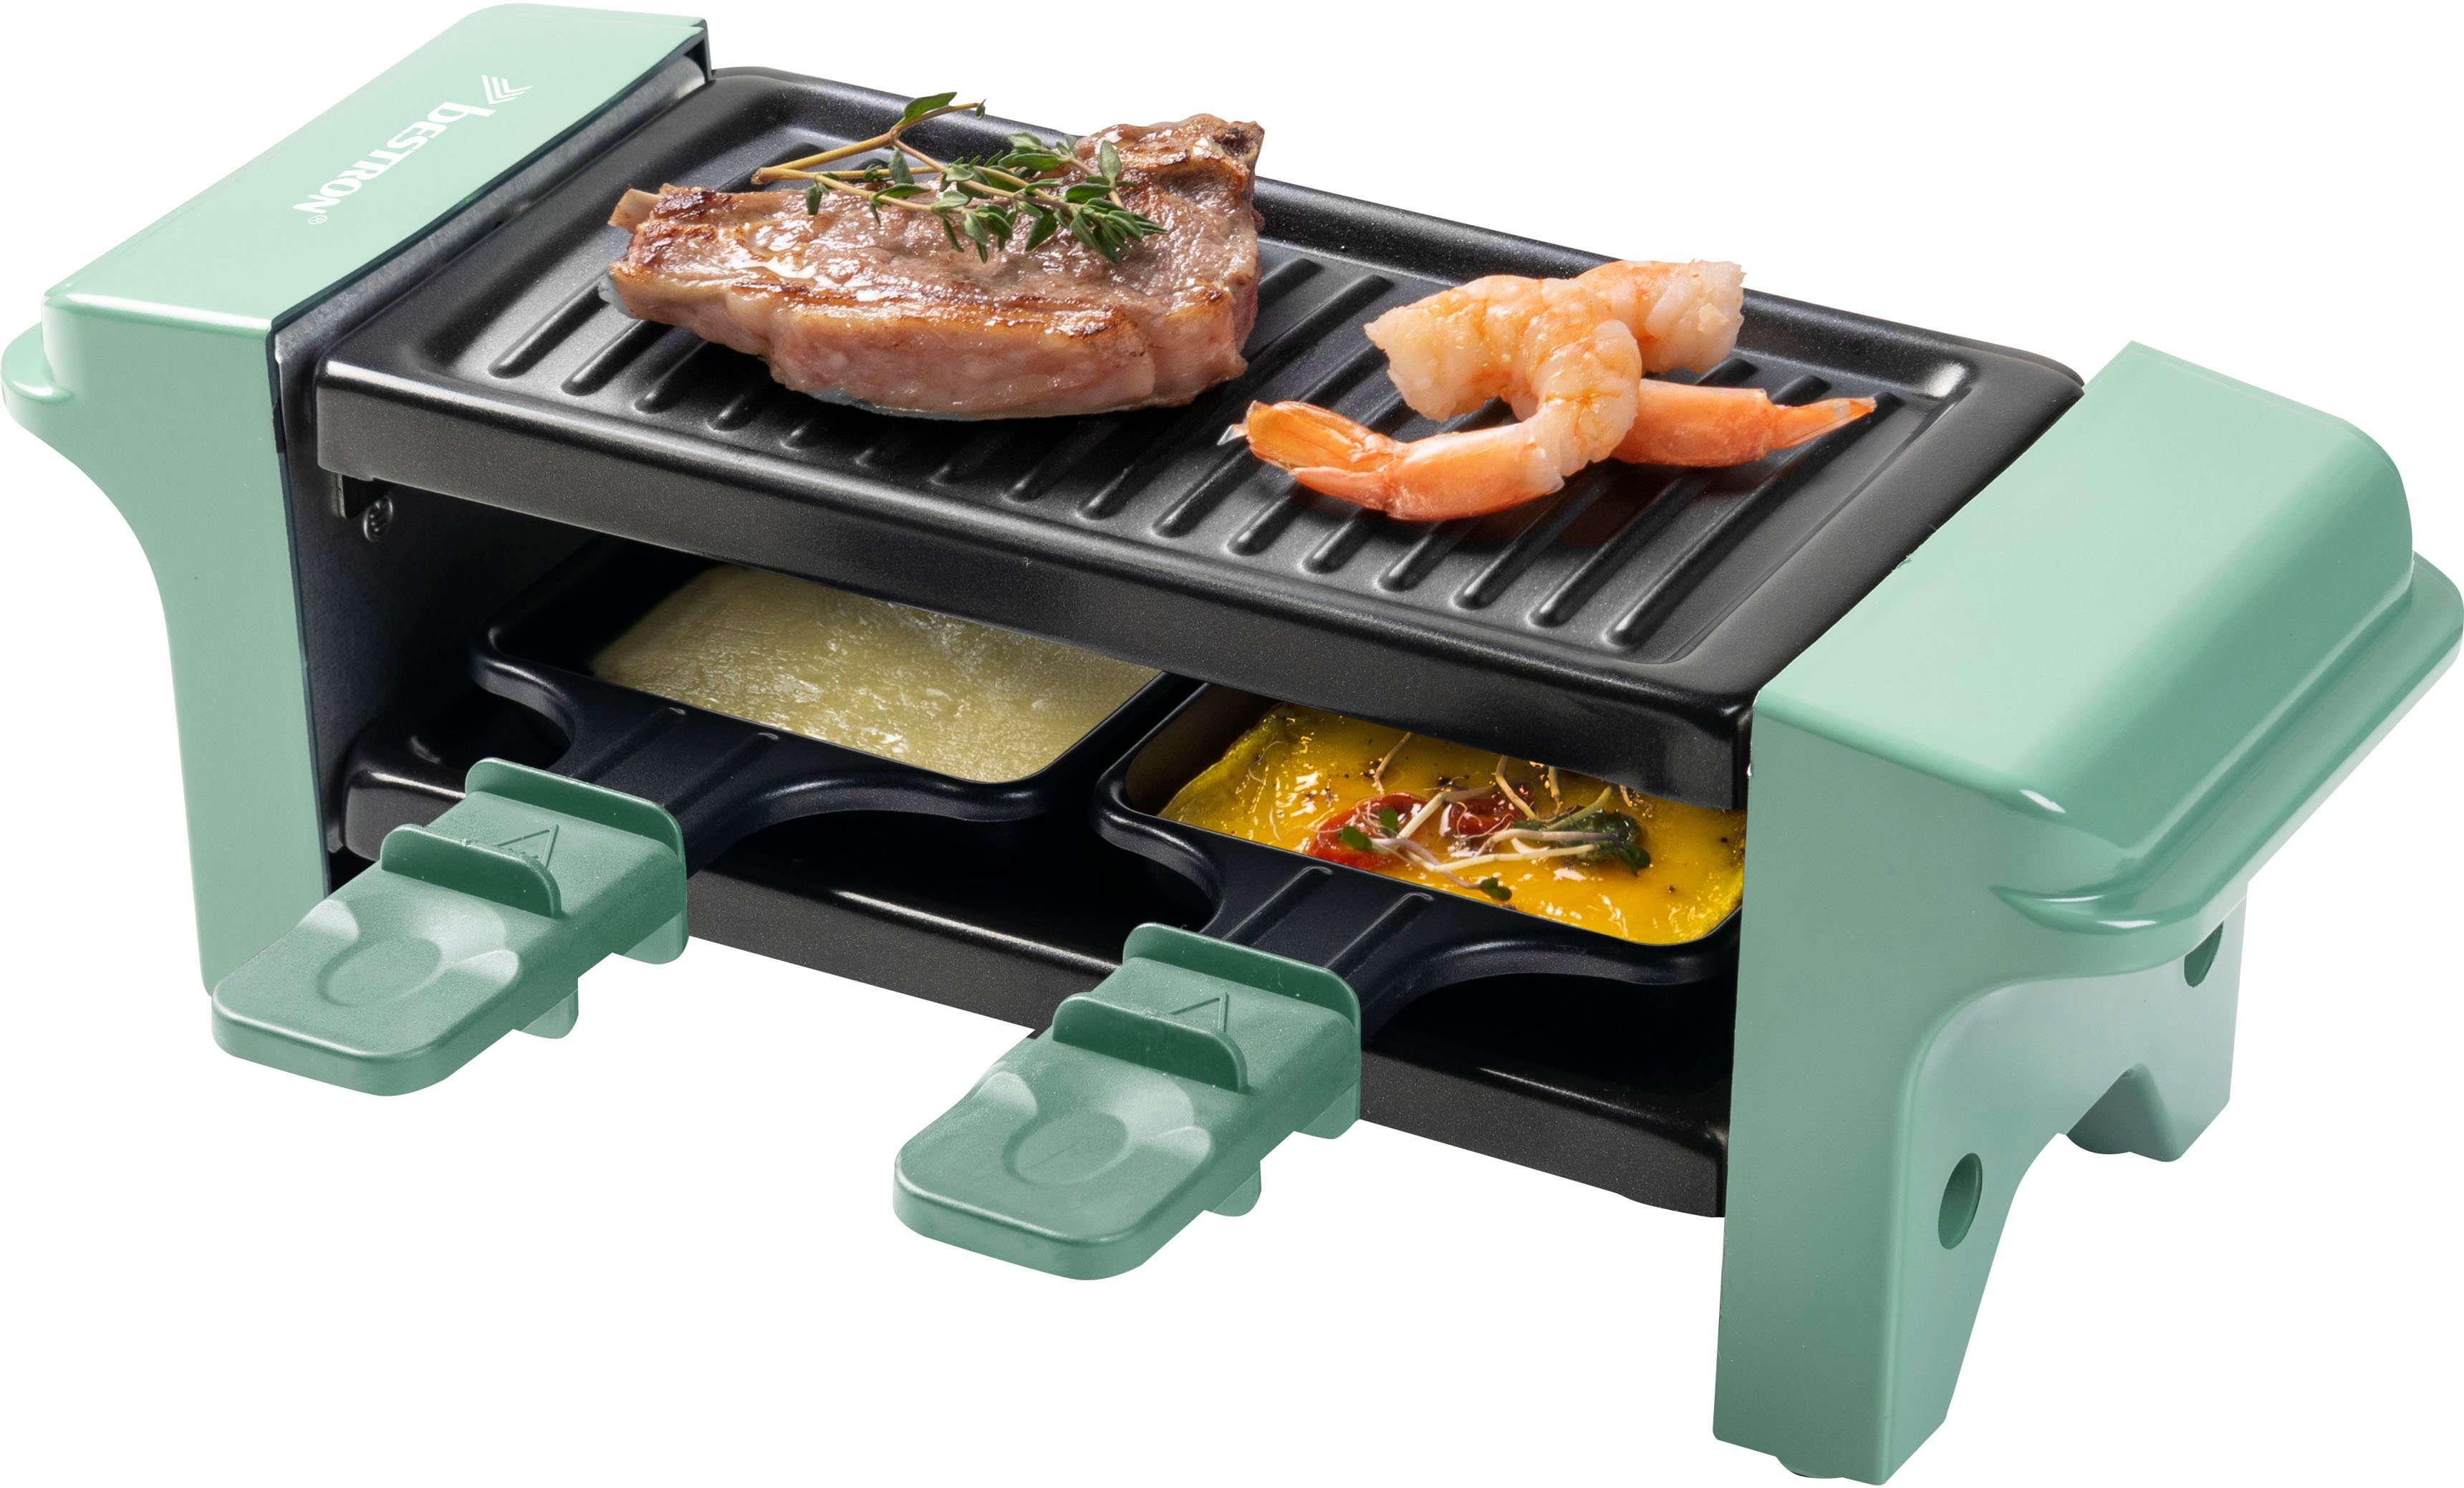 Raclette & Raclette-Grill » Jetzt online kaufen | OTTO